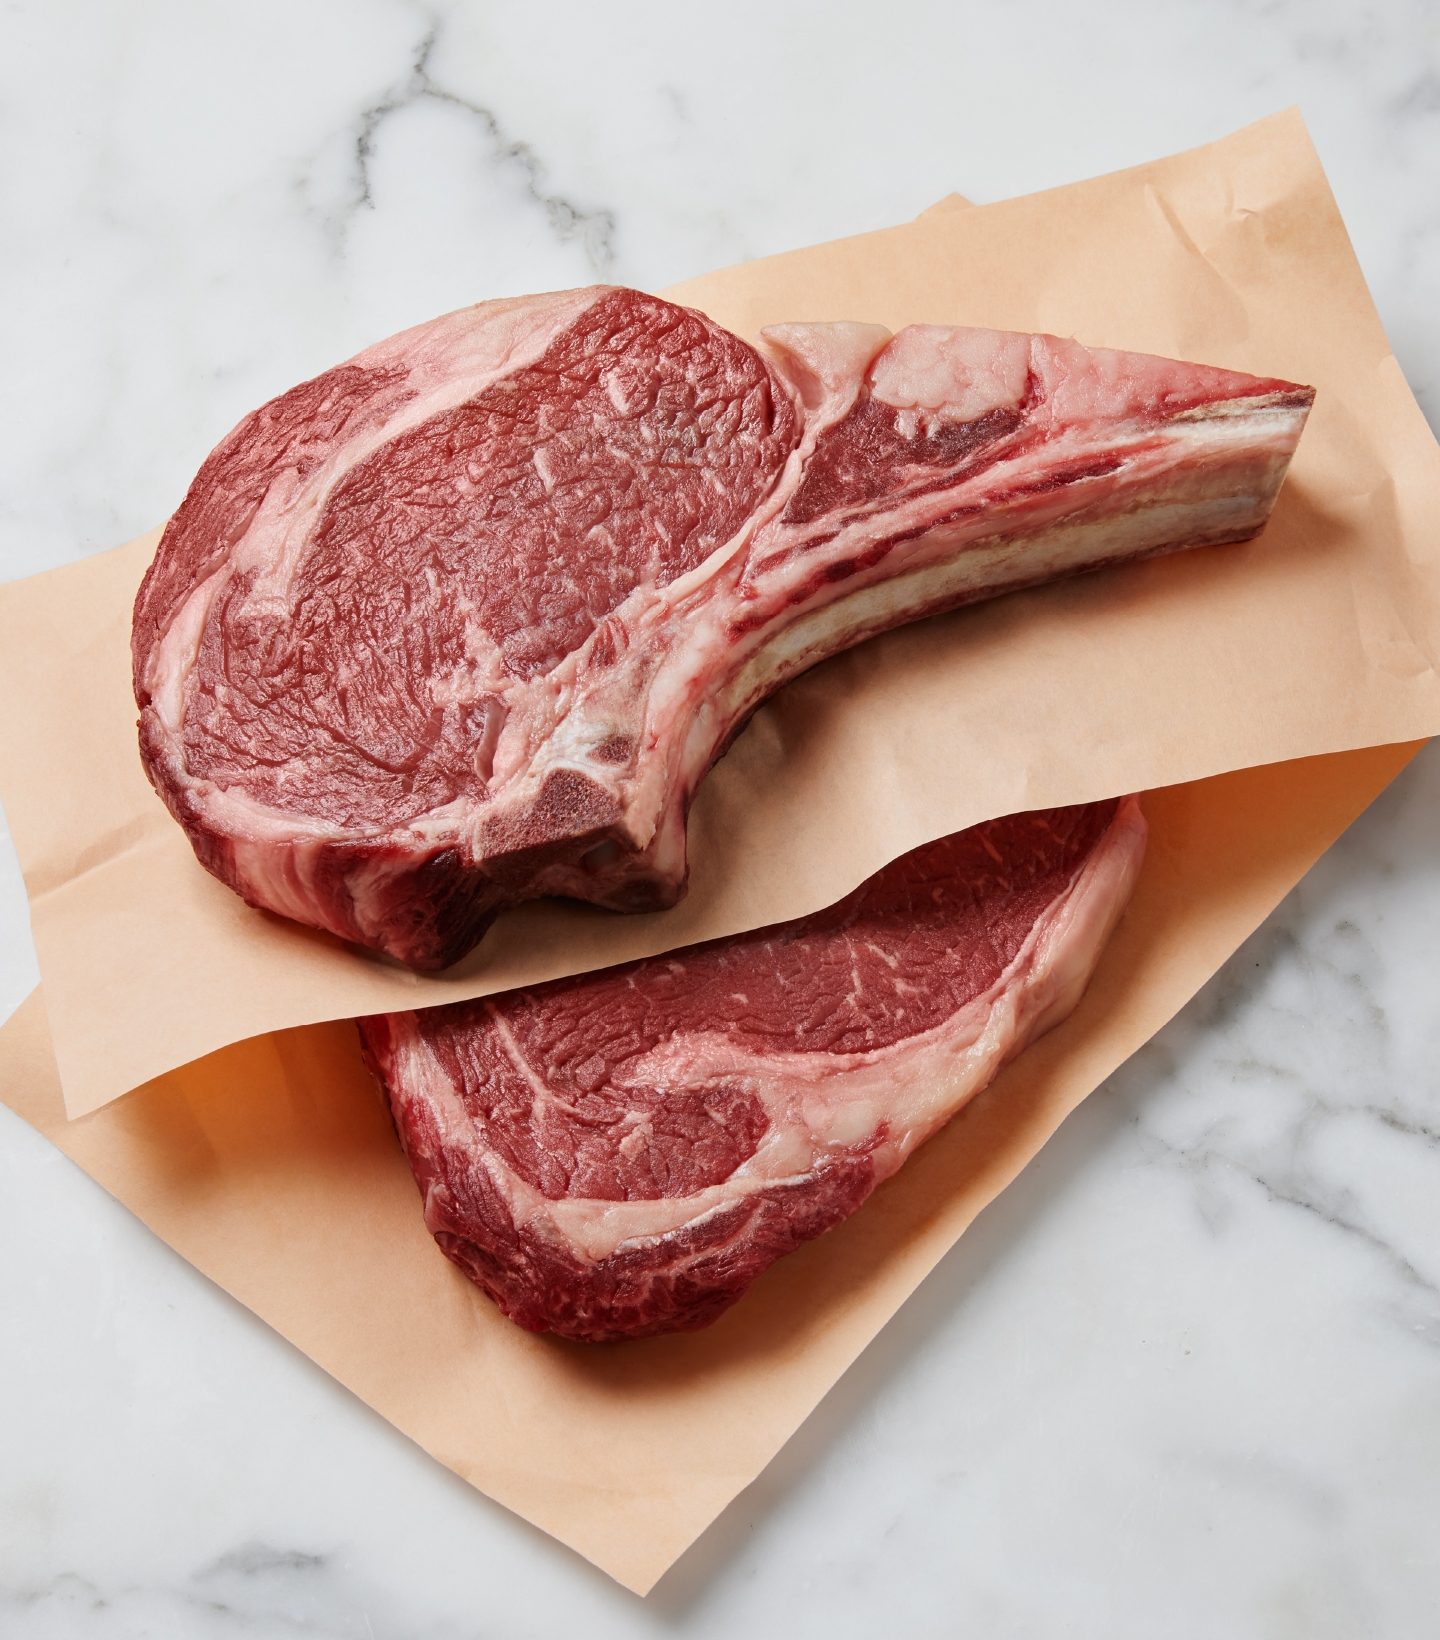 Two marbled raw beef ribeye steaks on a white marble countertop